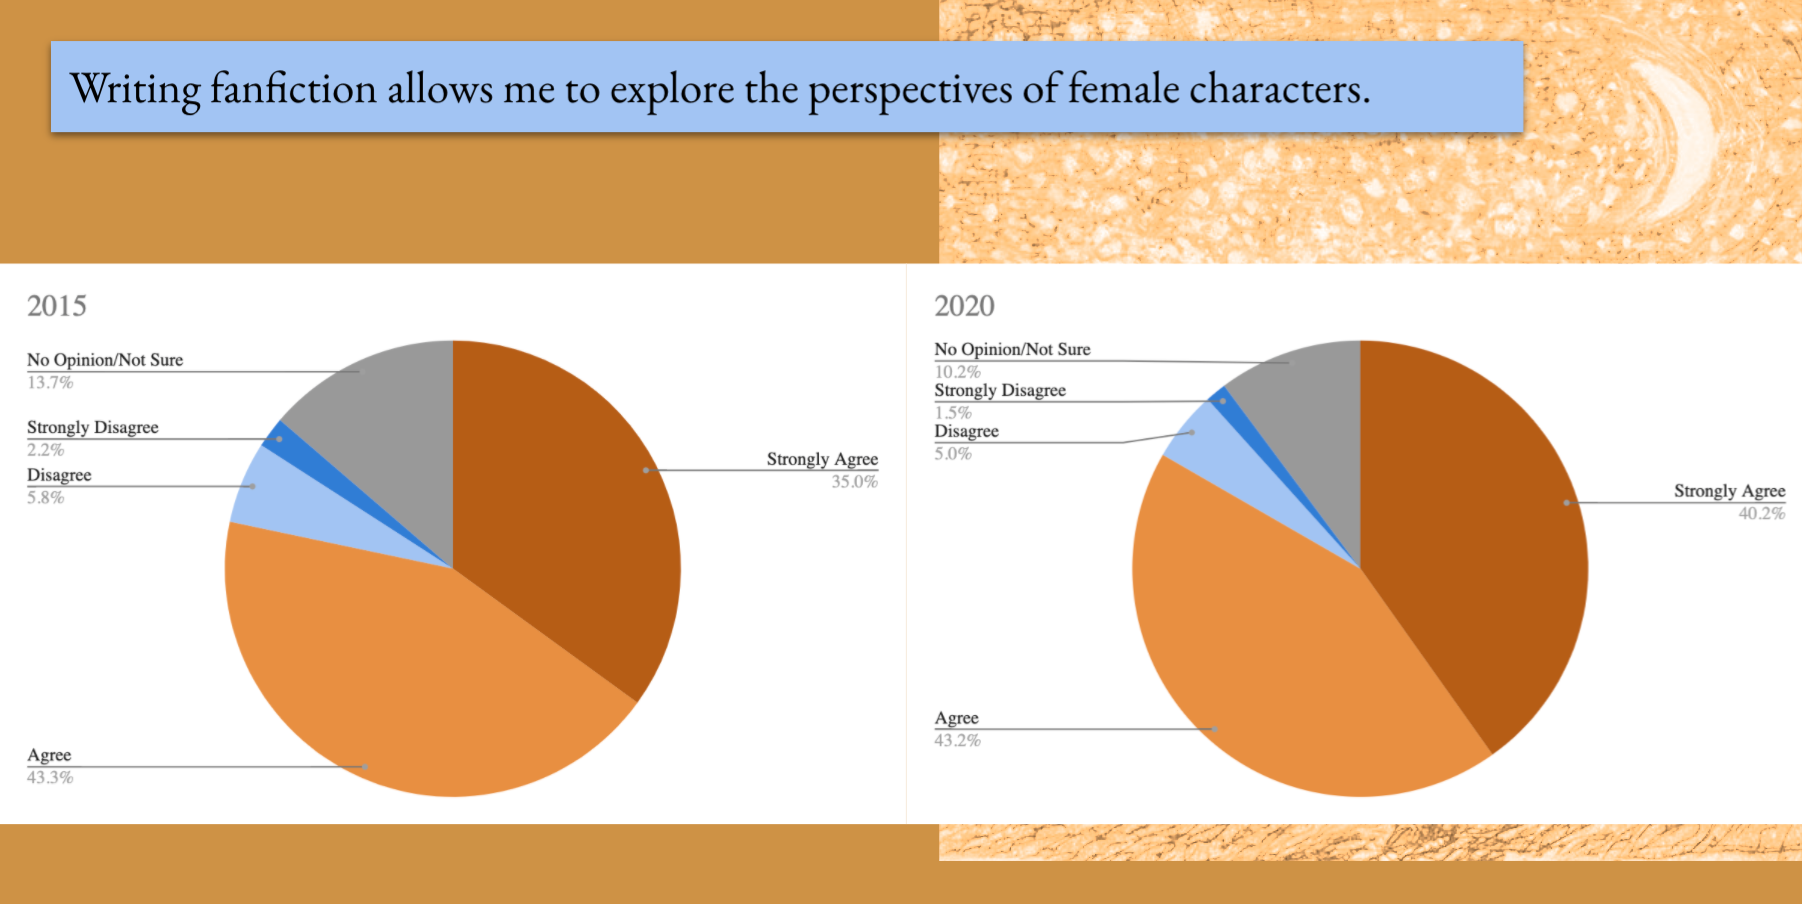 Most writers use their stories to explore the perspectives of female characters, with a slight increase between 2015 and 2020